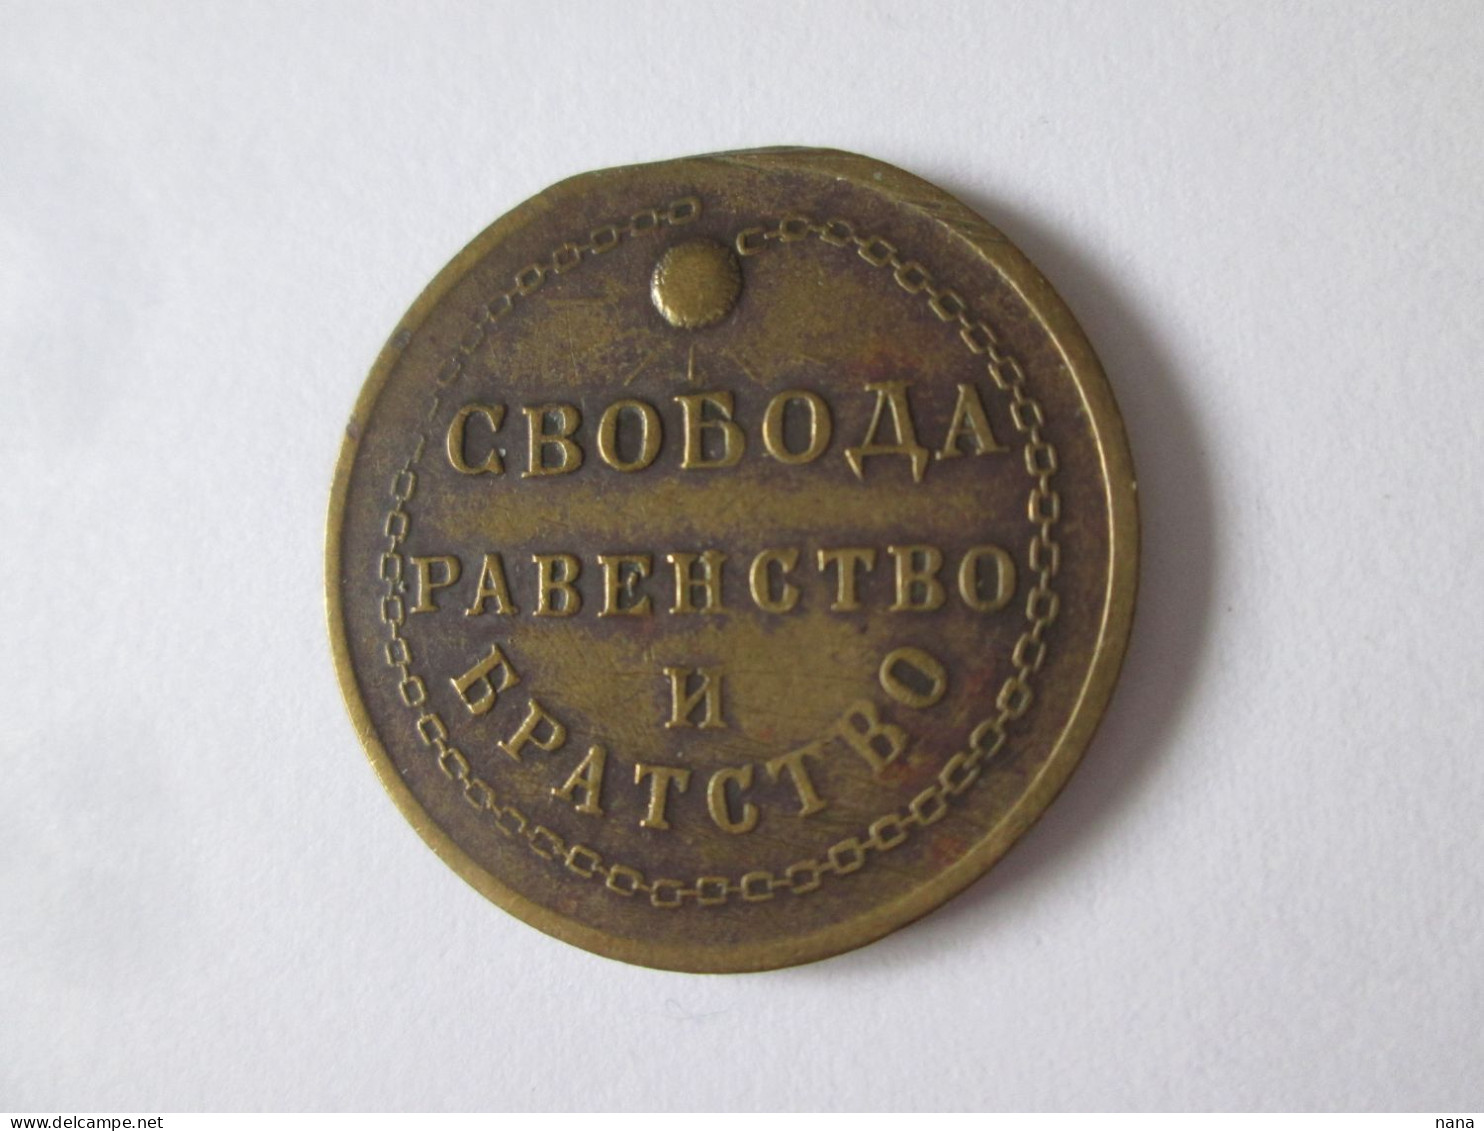 Rare! 1917 Russie Medaille Provis.du Gouvern.Kerensky/1917 Russia Provisional Kerensky Government Medal - Russie